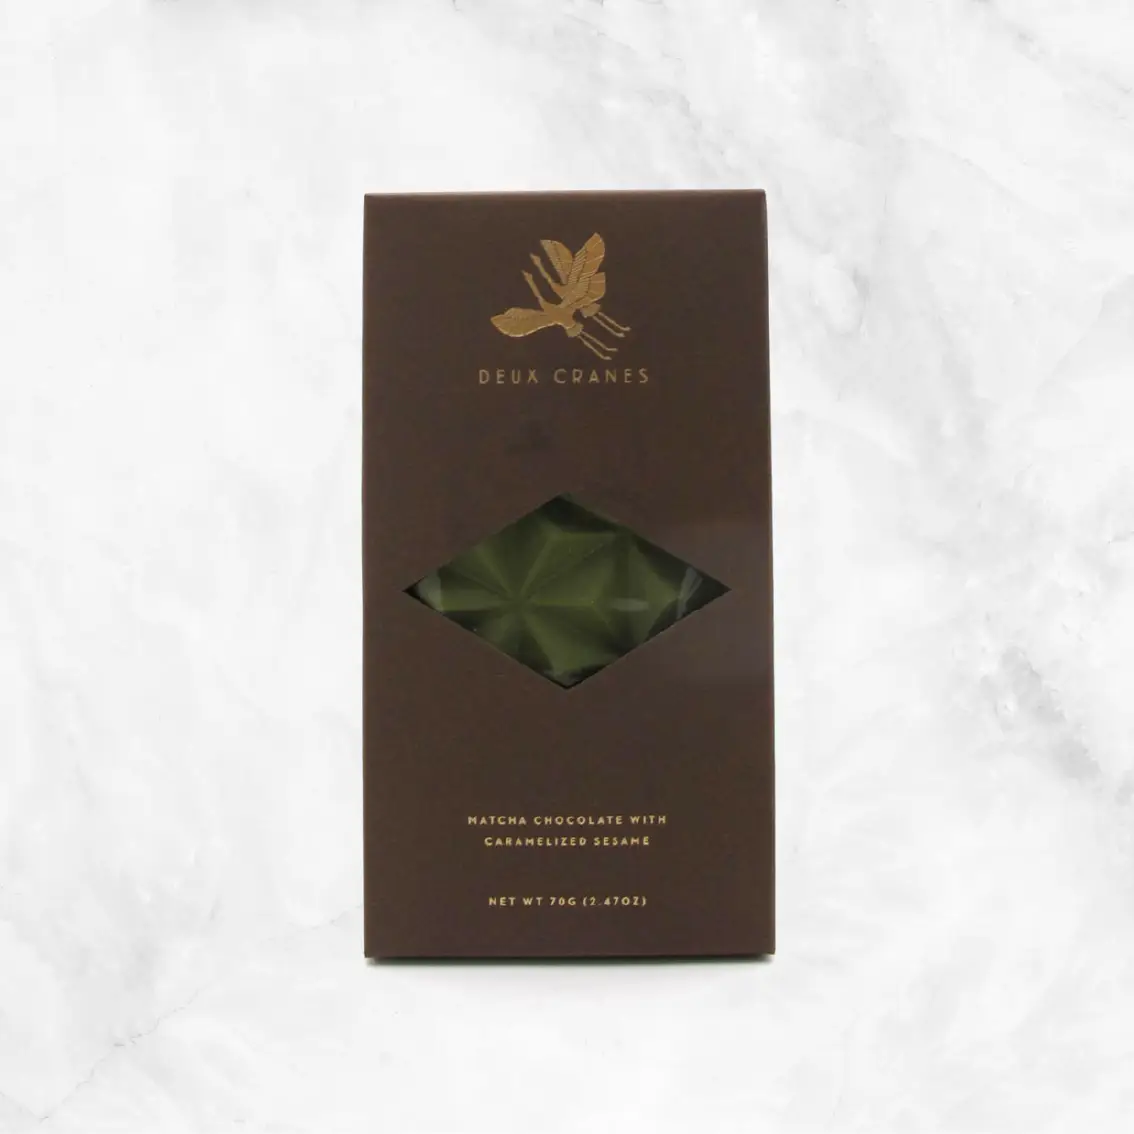 Matcha Chocolate with Caramelized Sesame Delivery